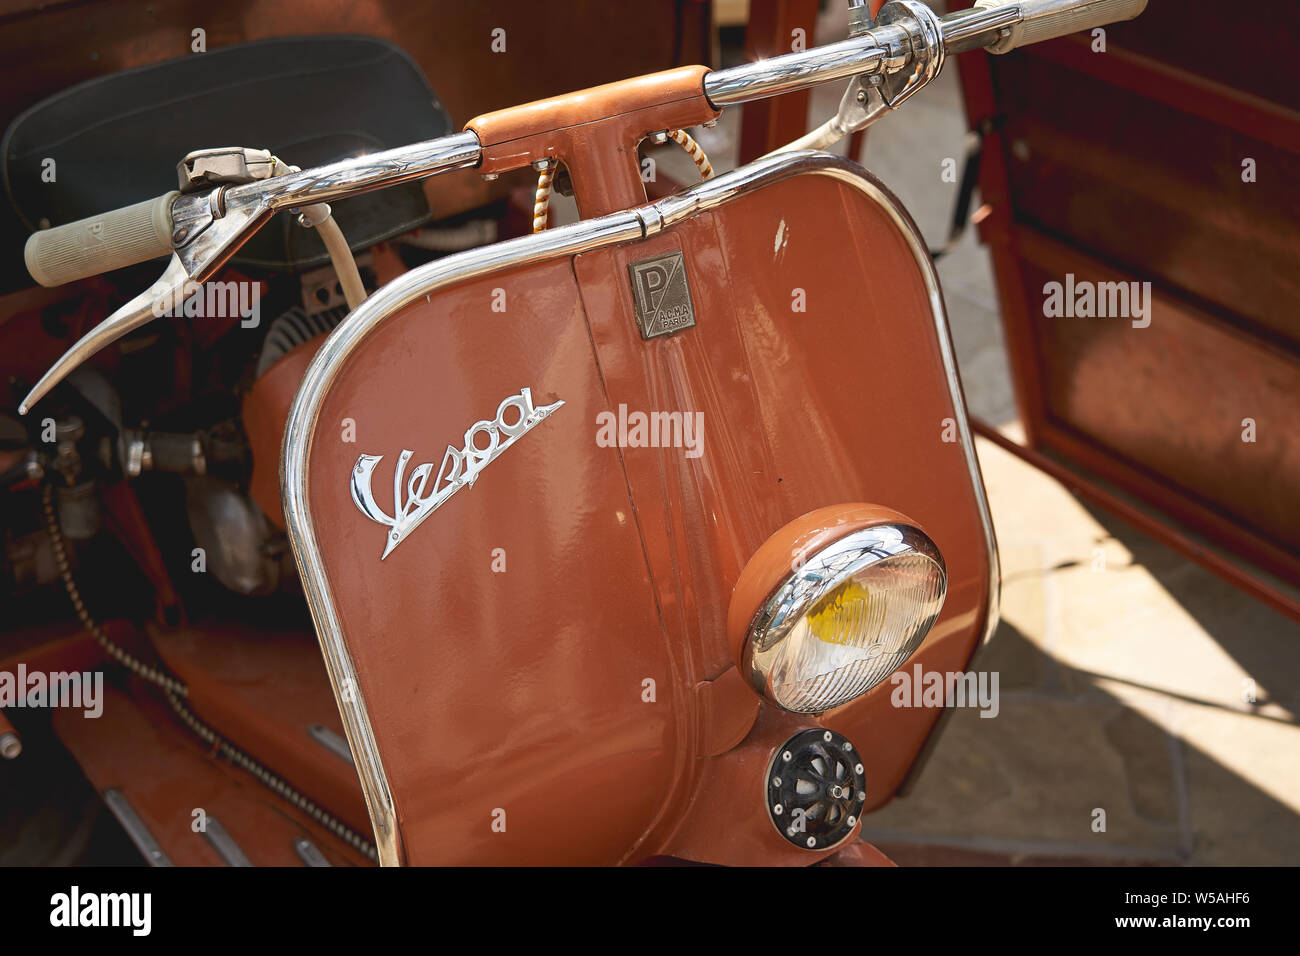 London, UK - July, 2019. Details of a Piaggio Vespa scooter. Stock Photo